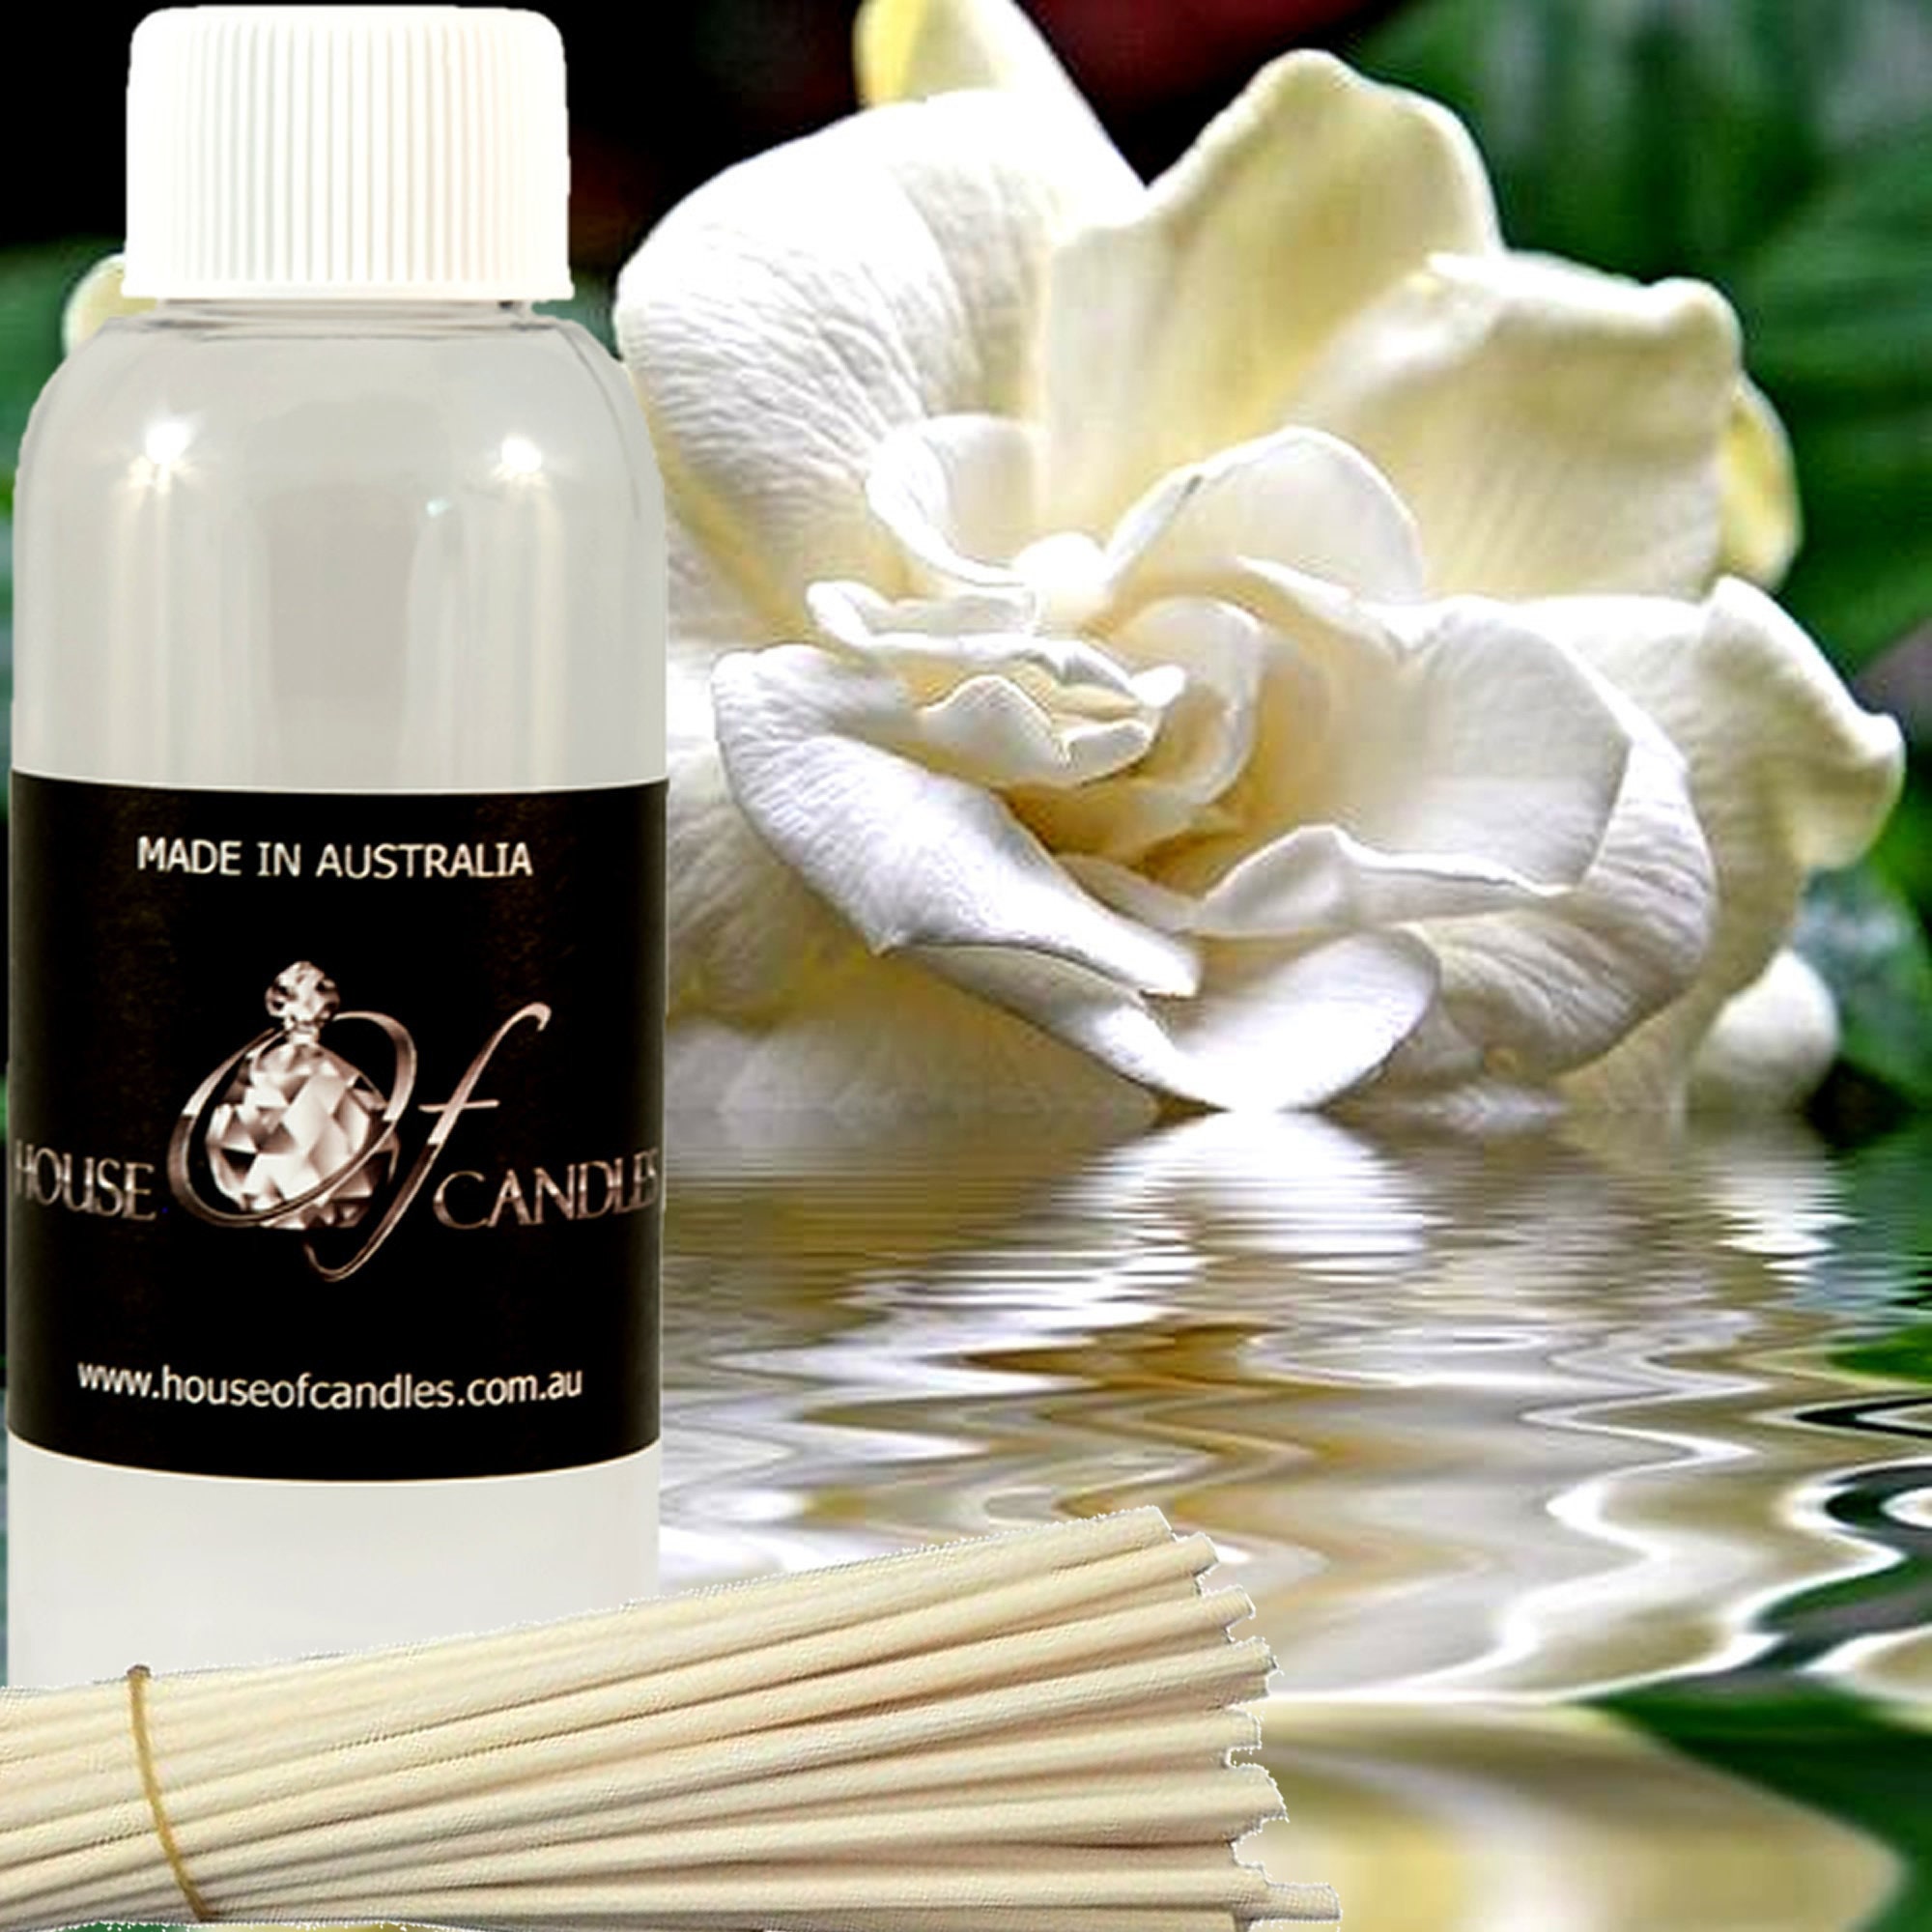  P&J Fragrance Oil Polynesian Set  Plumeria, Aloe, Pineapple,  Bamboo, Gardenia, Coconut Candle Scents for Candle Making, Freshie Scents,  Soap Making Supplies, Diffuser Oil Scents : Books